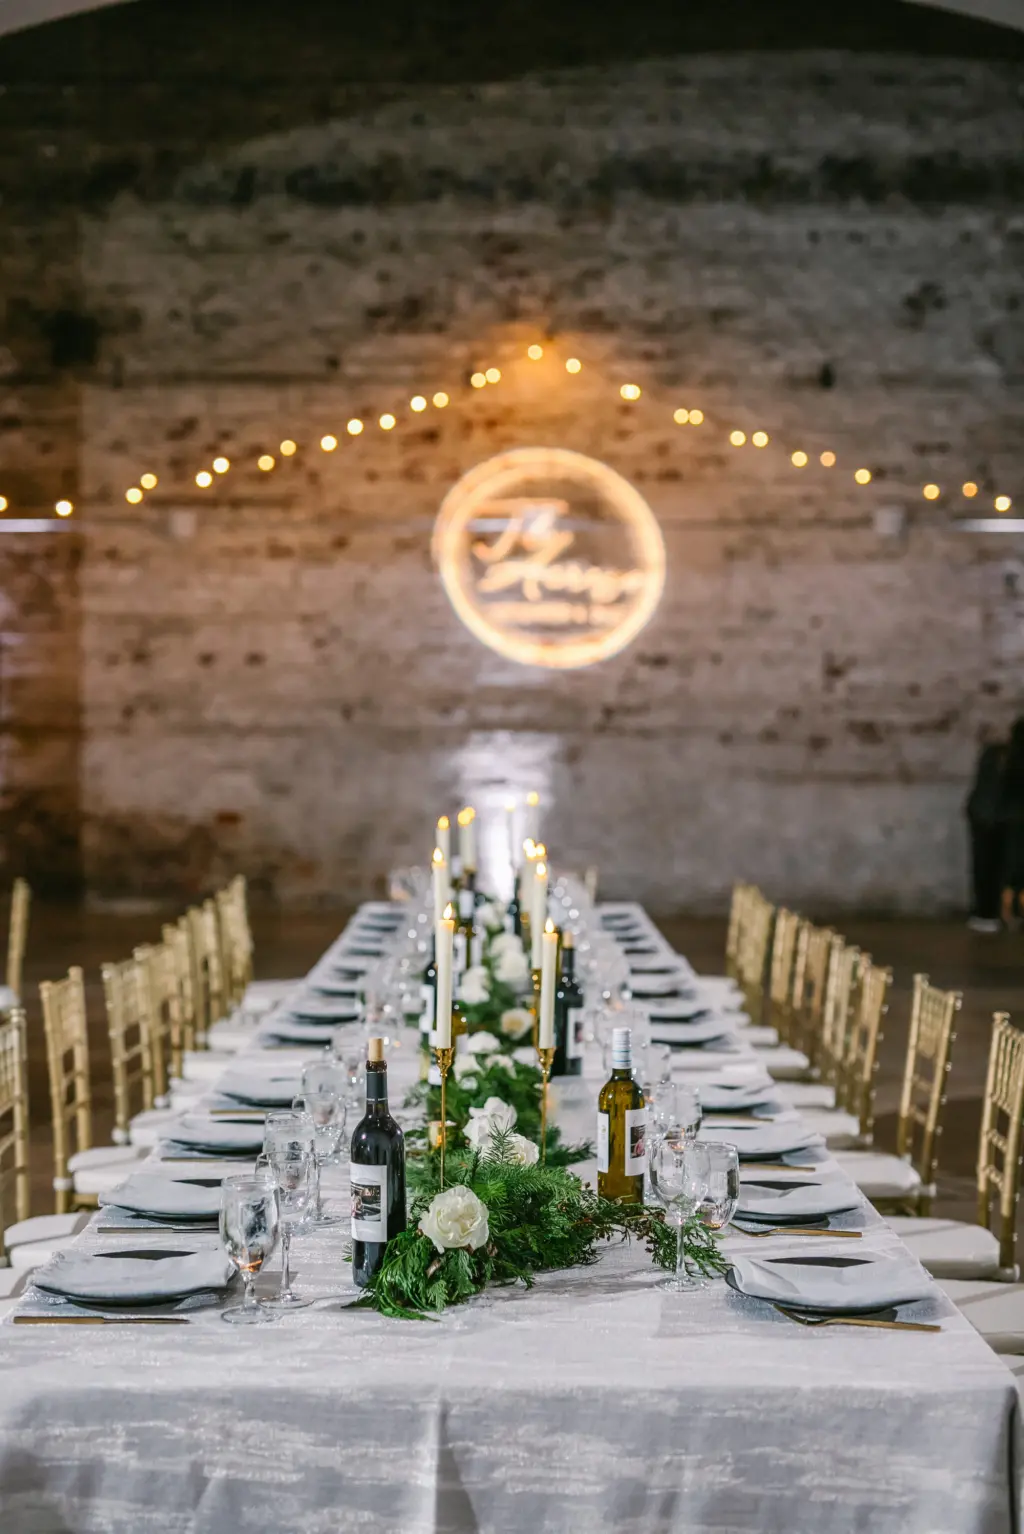 Classic Black and White Wedding Reception Decor Ideas | Long Feasting Tables | Greenery Garland and Taper Candles with Gold Holders Centerpiece Inspiration | Personalized Wine Bottles for Guests | Tampa Bay Rental Company A Chair Affair